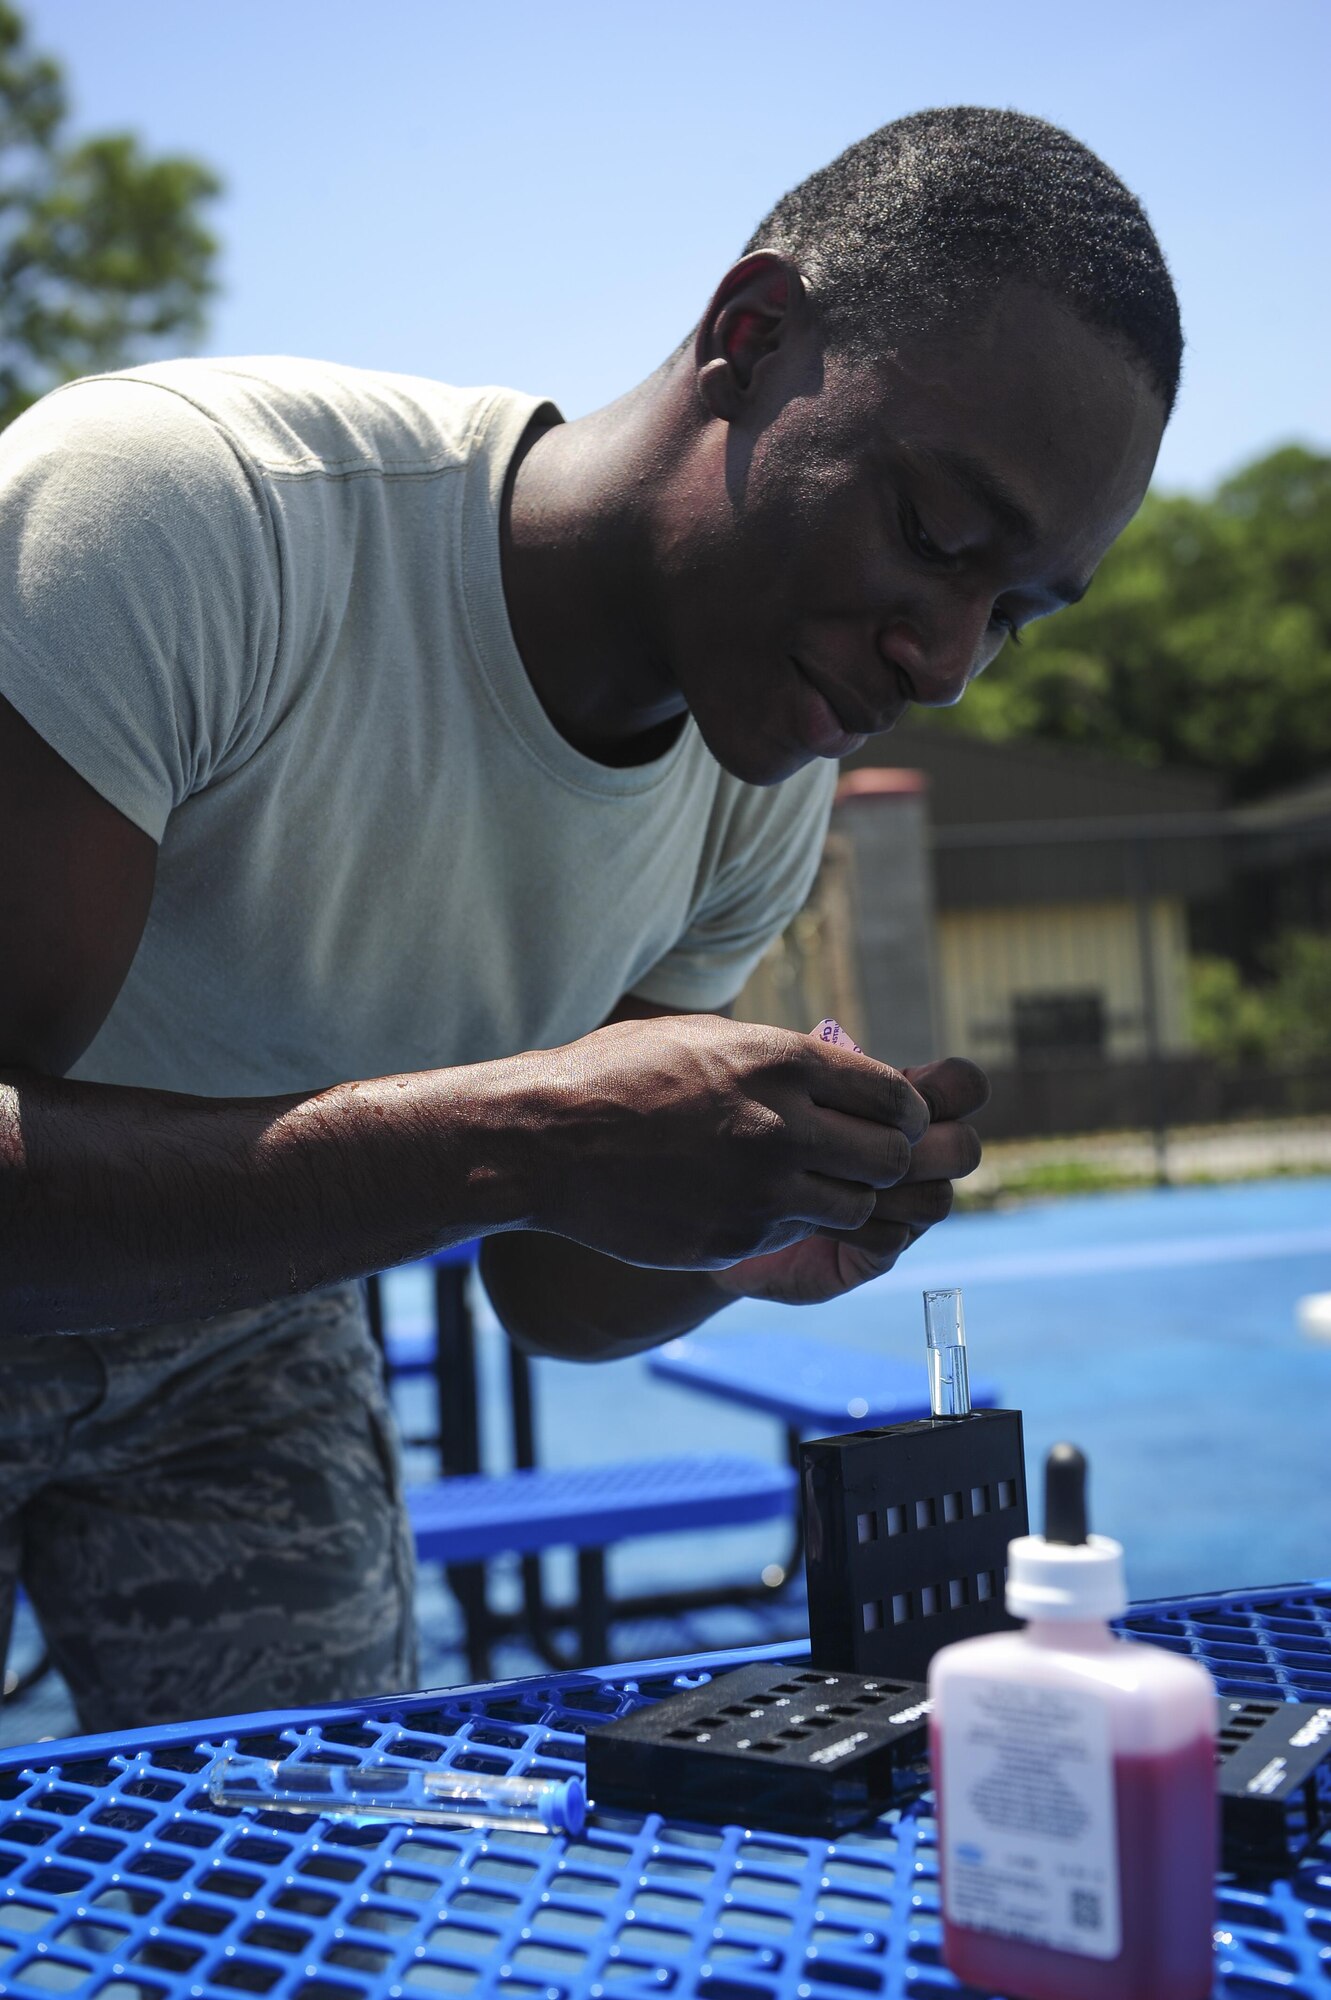 Airman 1st Class Joseph Brown, 1st Special Operations Medical Support Squadron bioenvironmental engineer technician, drops a chemical tablet into a test tube of pool water at the Aquatic Center on Hurlburt Field, Fla., July 22, 2015. The chemical tablet reacts in the water and changes color depending on the amount of  chlorine present. (U.S. Air Force photo/Senior Airman Meagan Schutter)